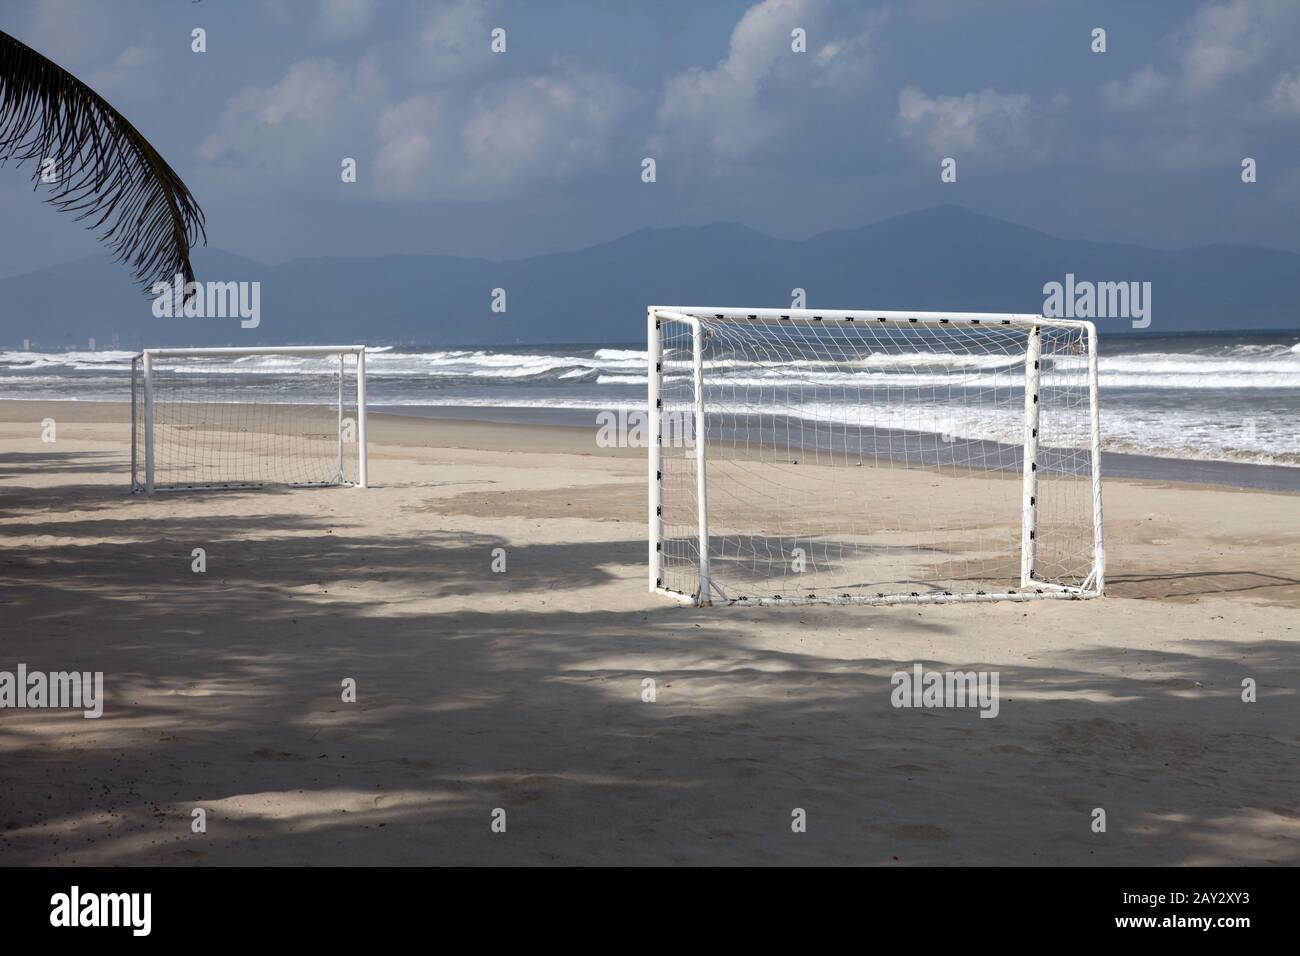 empty goal of a football or soccer playroung on the beach near the see on thesand Stock Photo